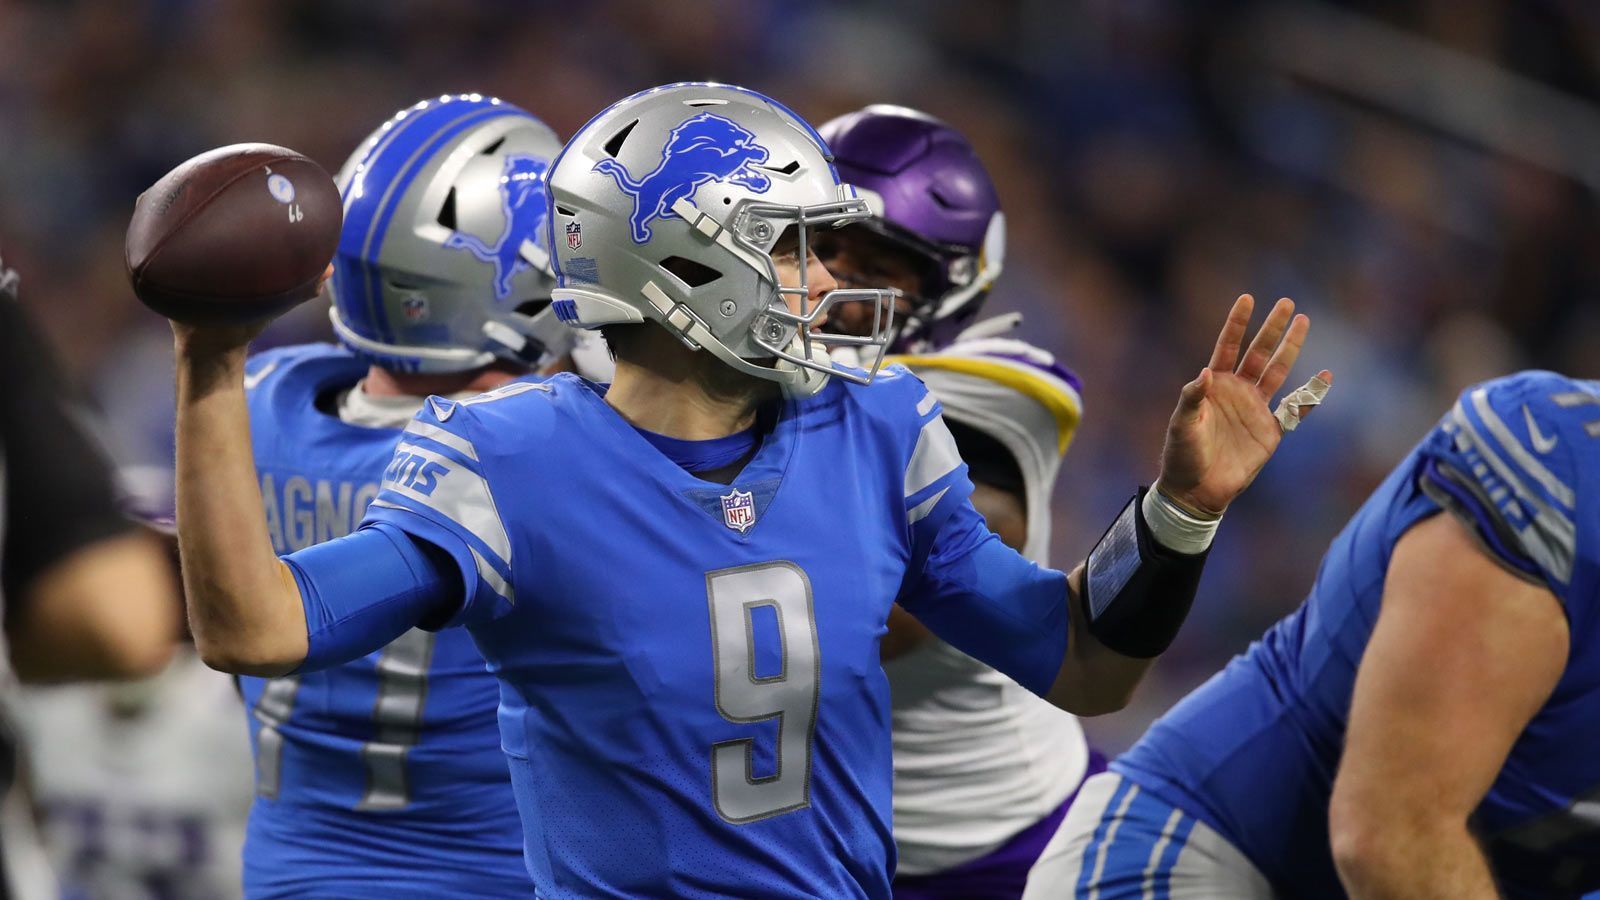 
                <strong>Detroit Lions: 9 Picks</strong><br>
                Runde 1: Pick 8Runde 2: Pick 43Runde 3: Pick 88 (von den Eagles)Runde 4: Pick 111Runde 5: Pick 146Runde 6: Pick 184, Pick 204 (via Patriots)Runde 7: Pick 224, 229 (via Dolphins)
              